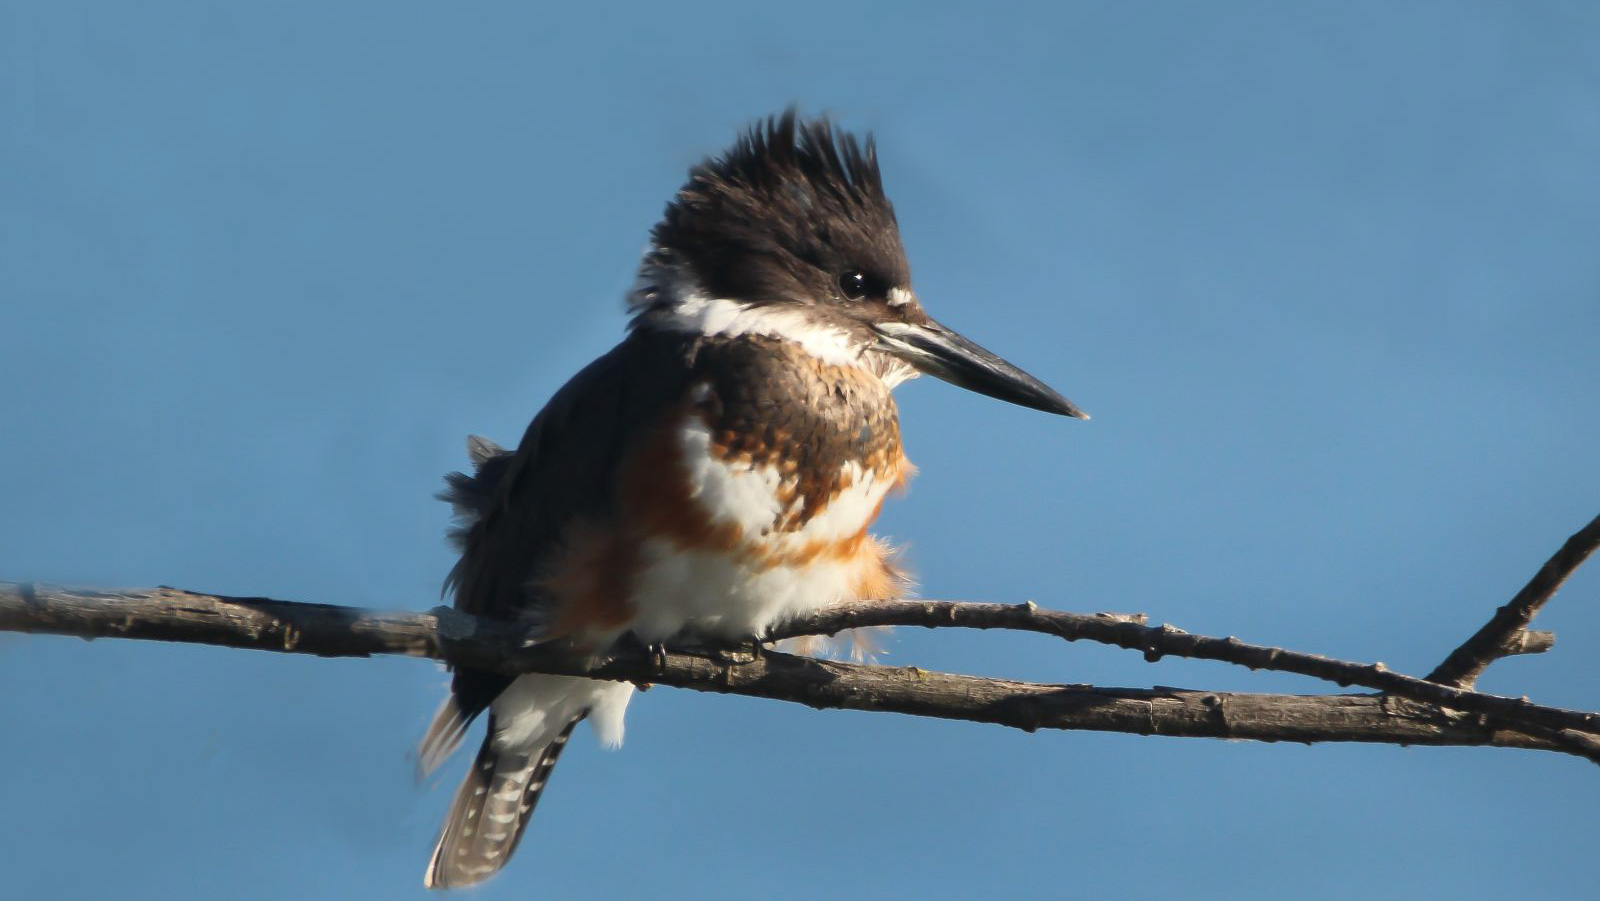 Photo: a female Belted Kingfisher. Credit: Dave Ostapiuk